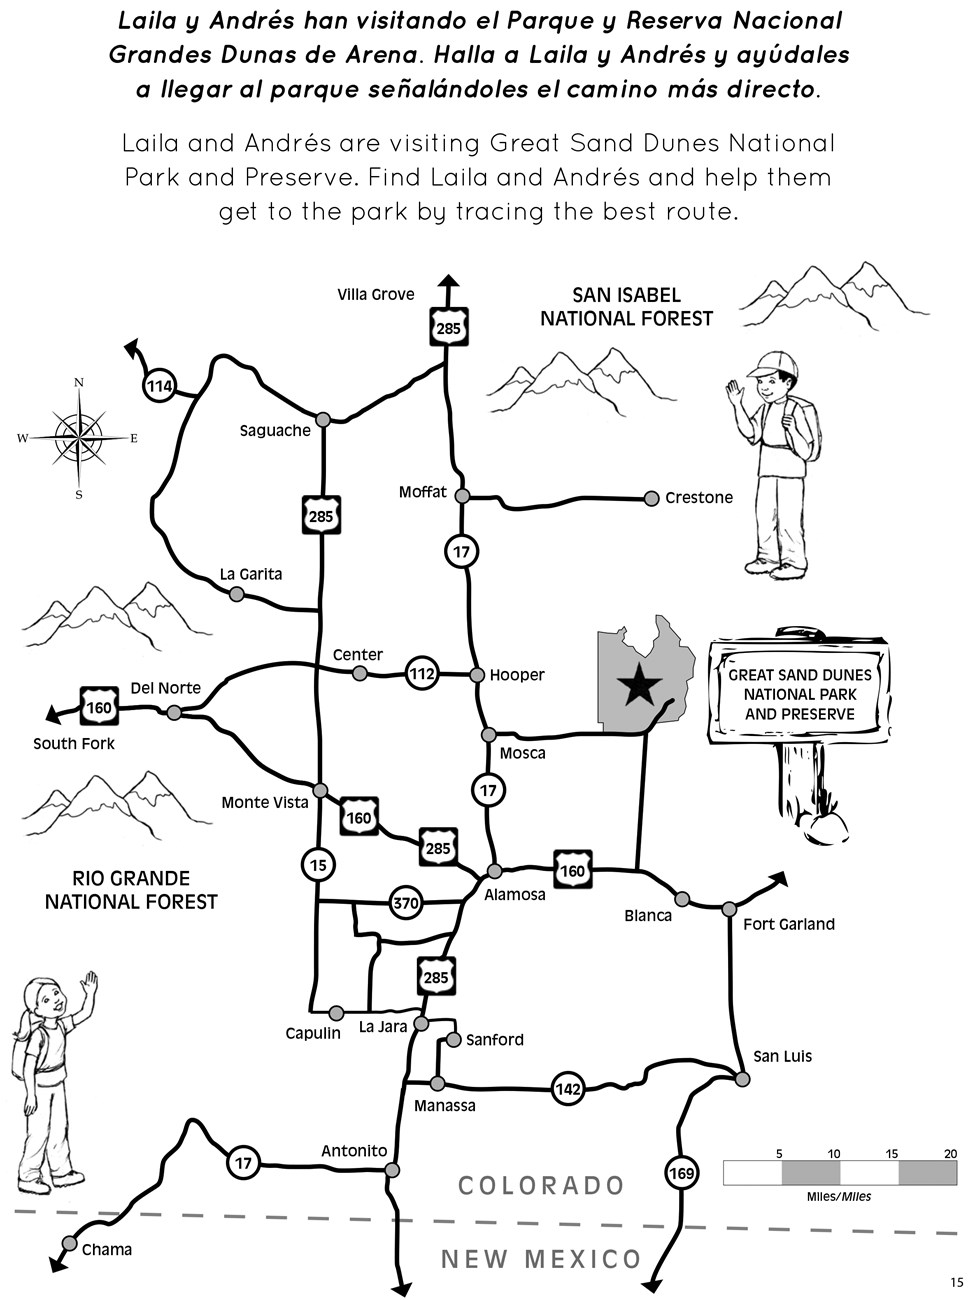 Page 1 - Map of San Luis Valley - help Laila and Andres find their way to Great Sand Dunes!